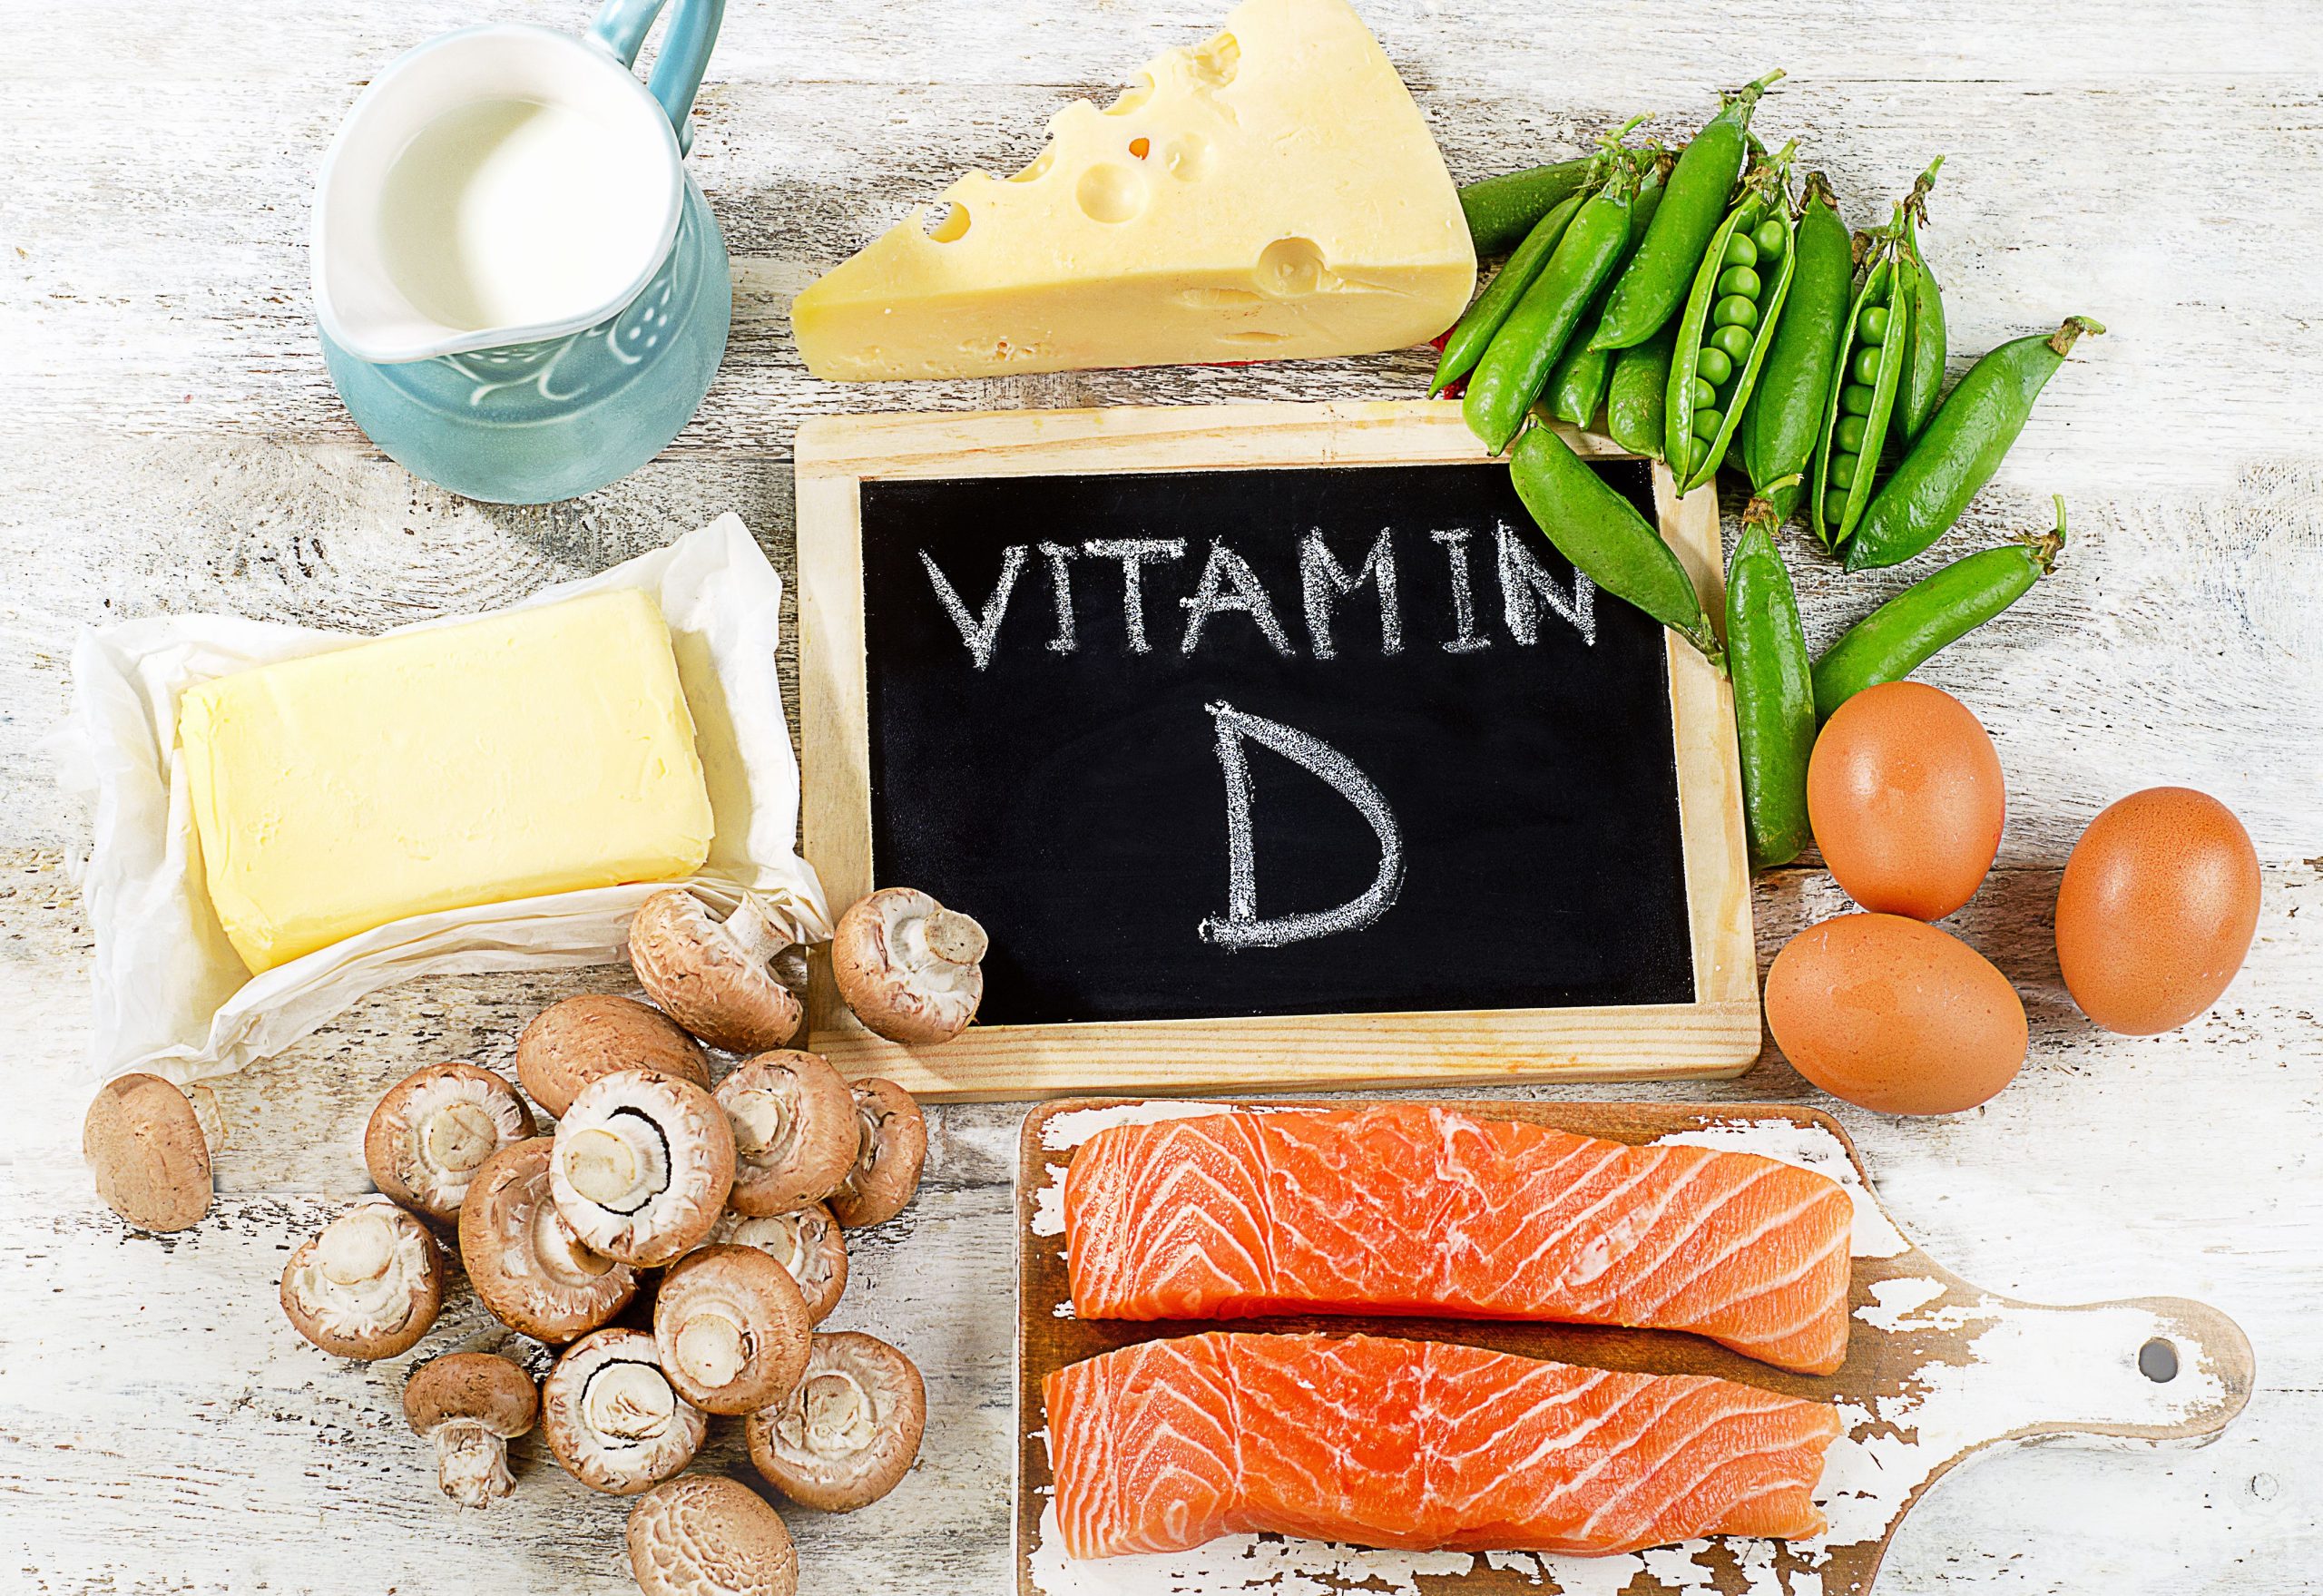 Ensure you are getting enough Vitamin D to reduce the impact of COVID-19